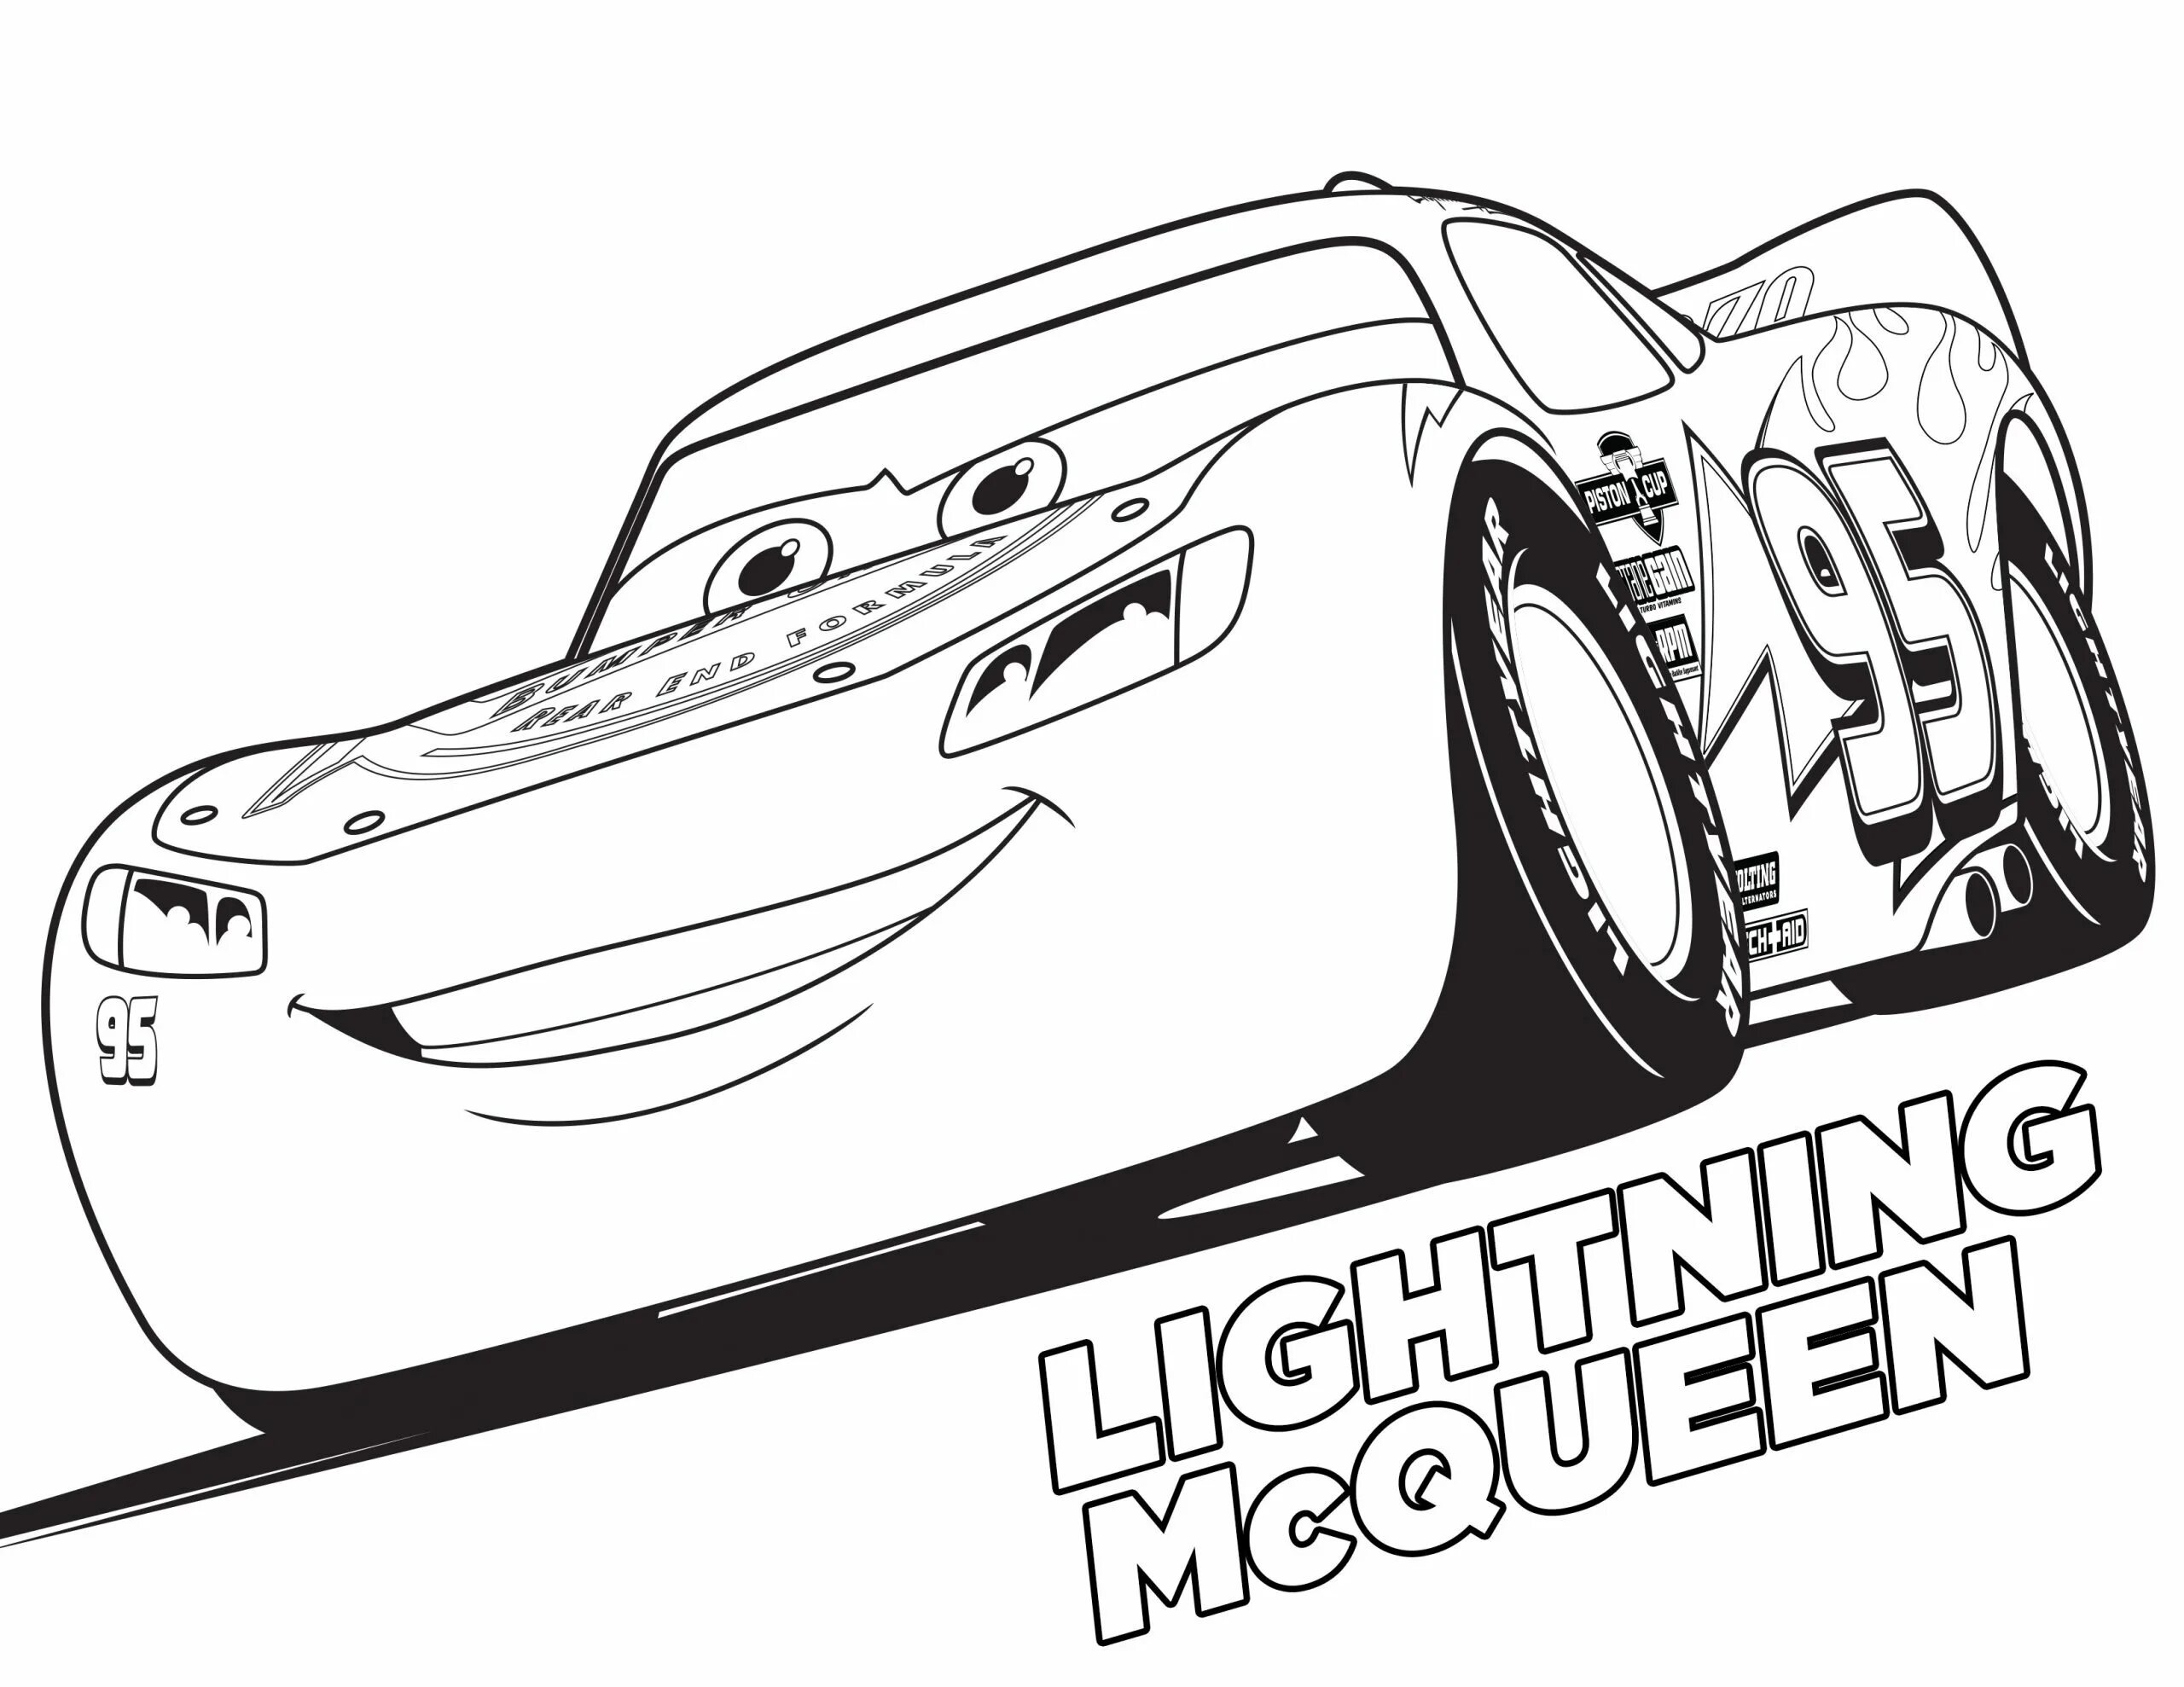 Macqueen's great car coloring pages